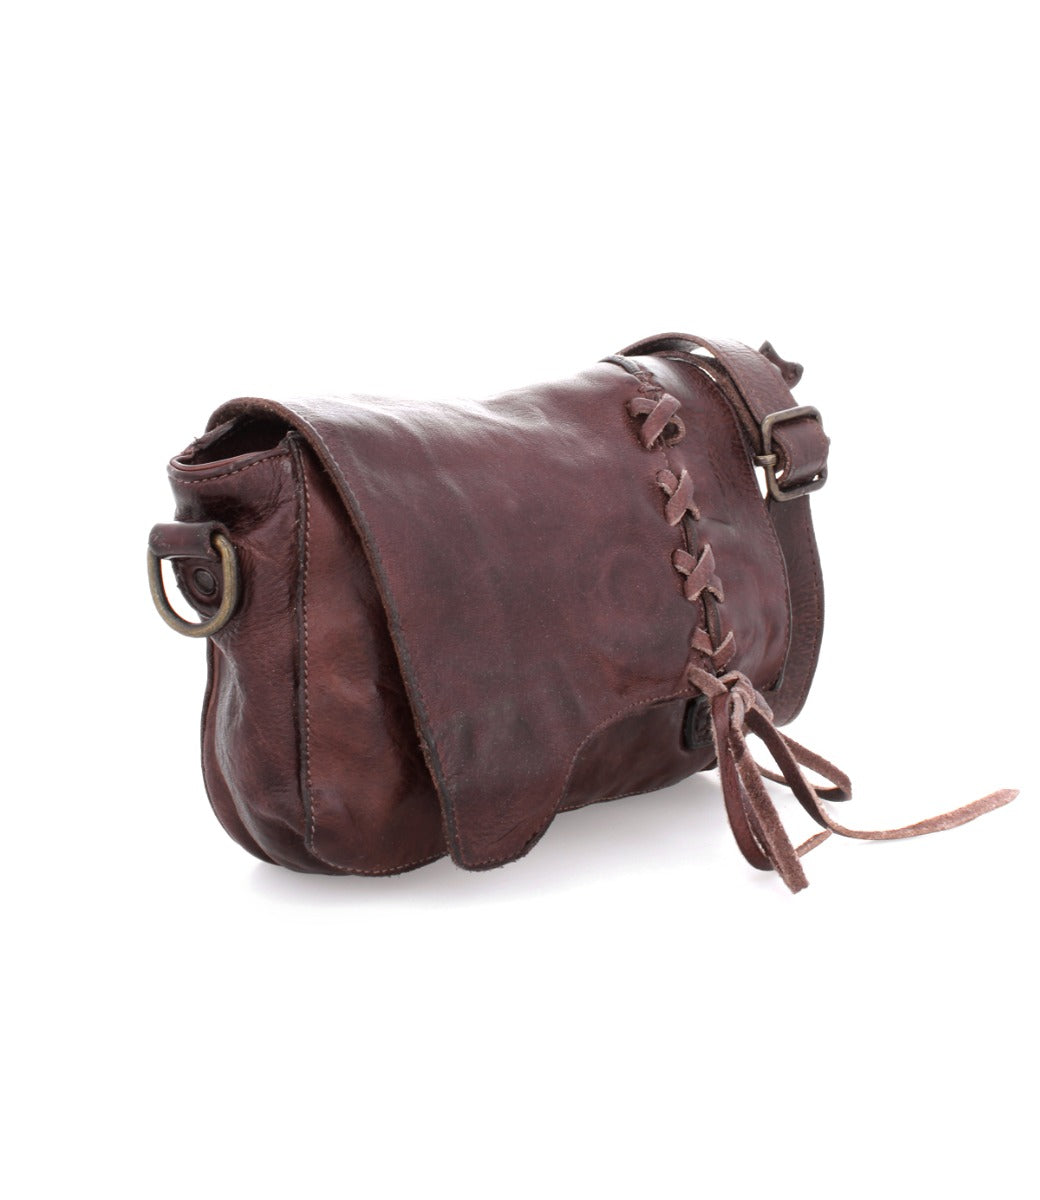 A brown leather crossbody bag with tassels called the Buffy by Bed Stu.